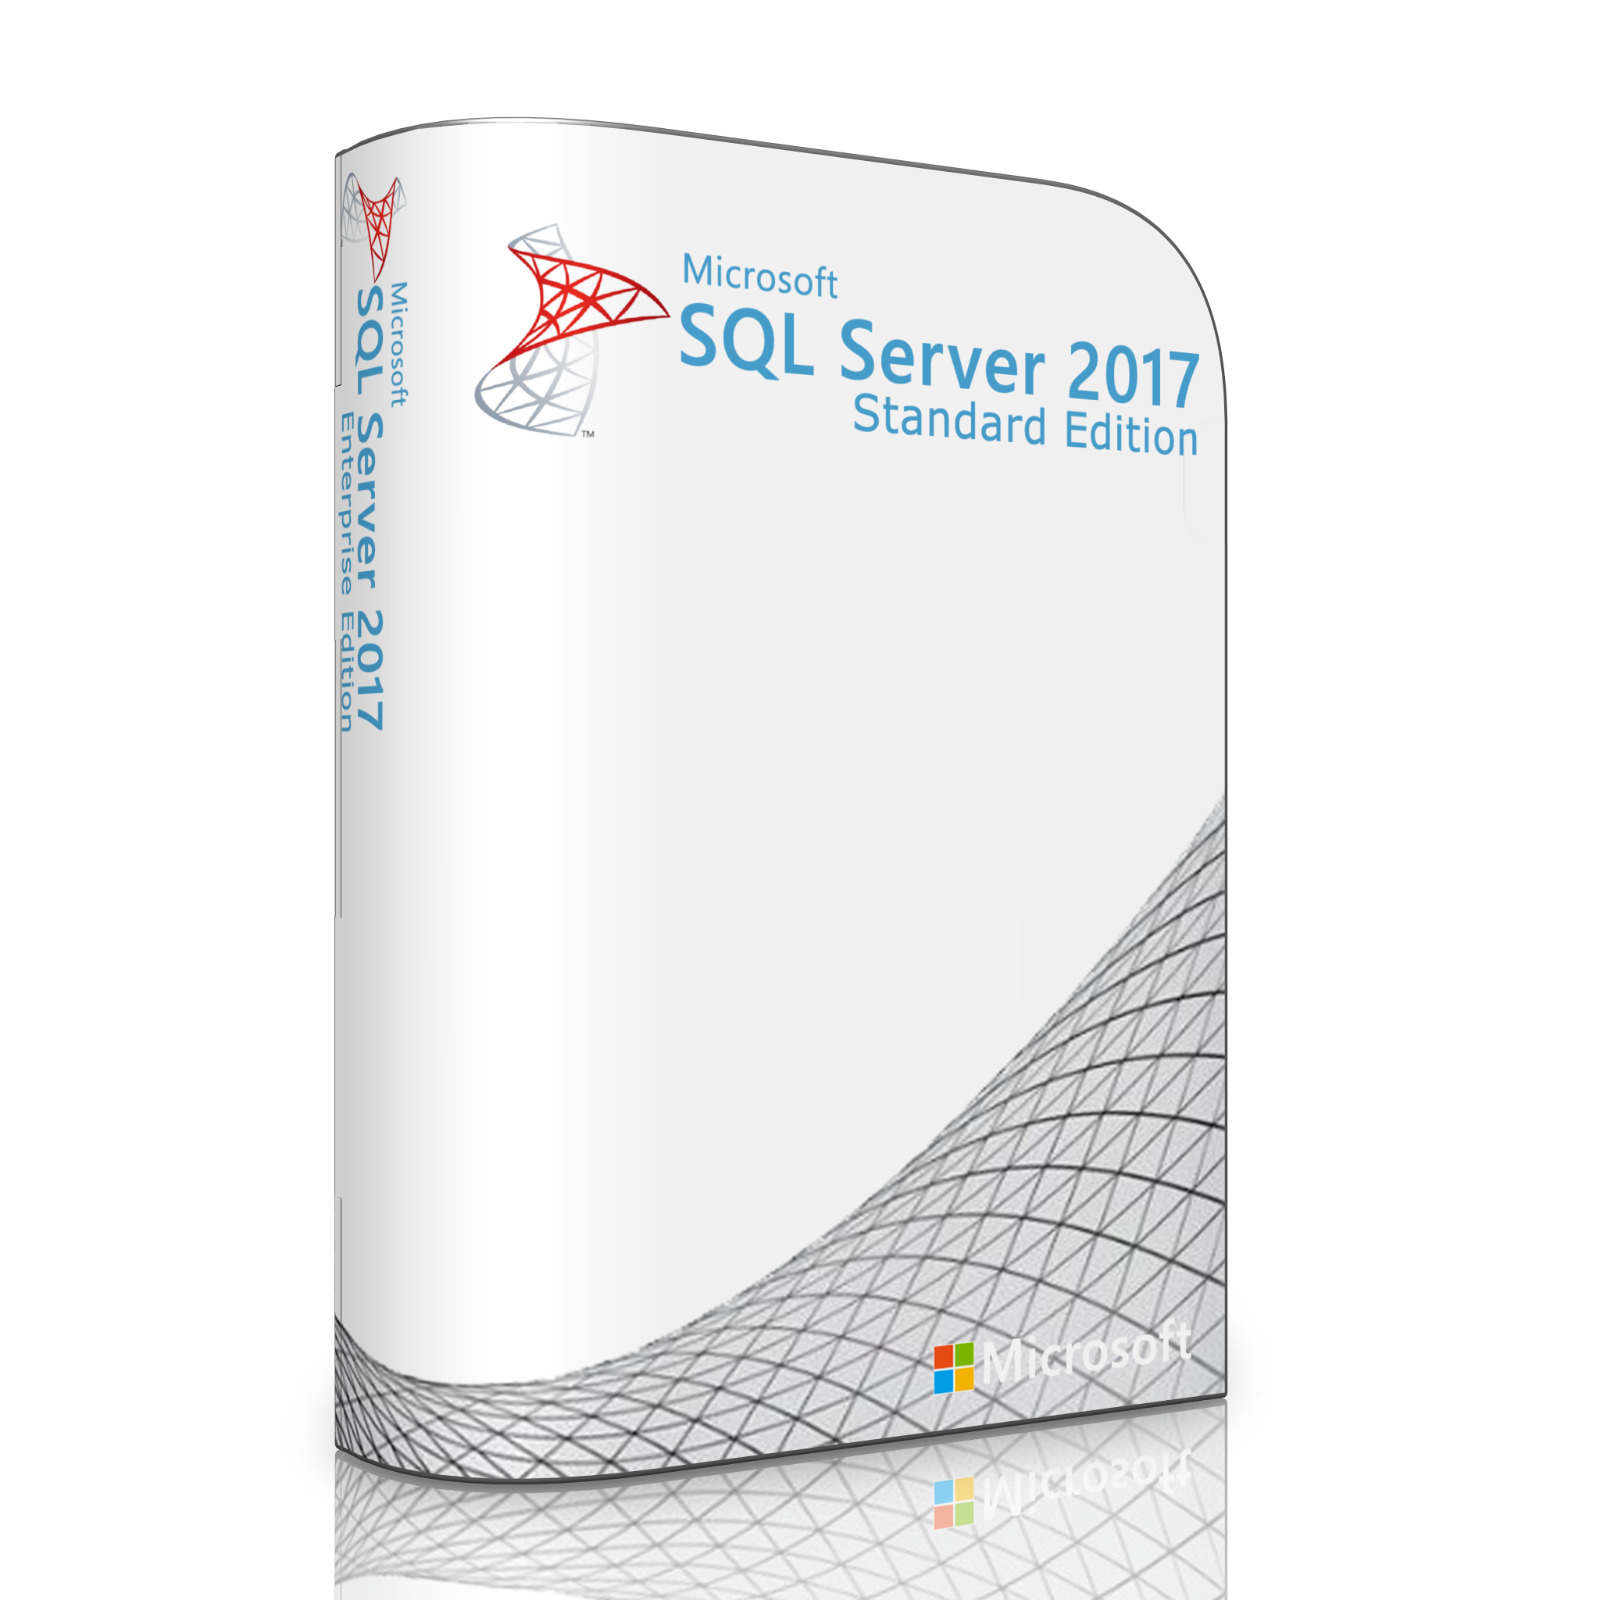 Microsoft SQL Server 2017 Standard with 24 Core License, unlimited User CALs